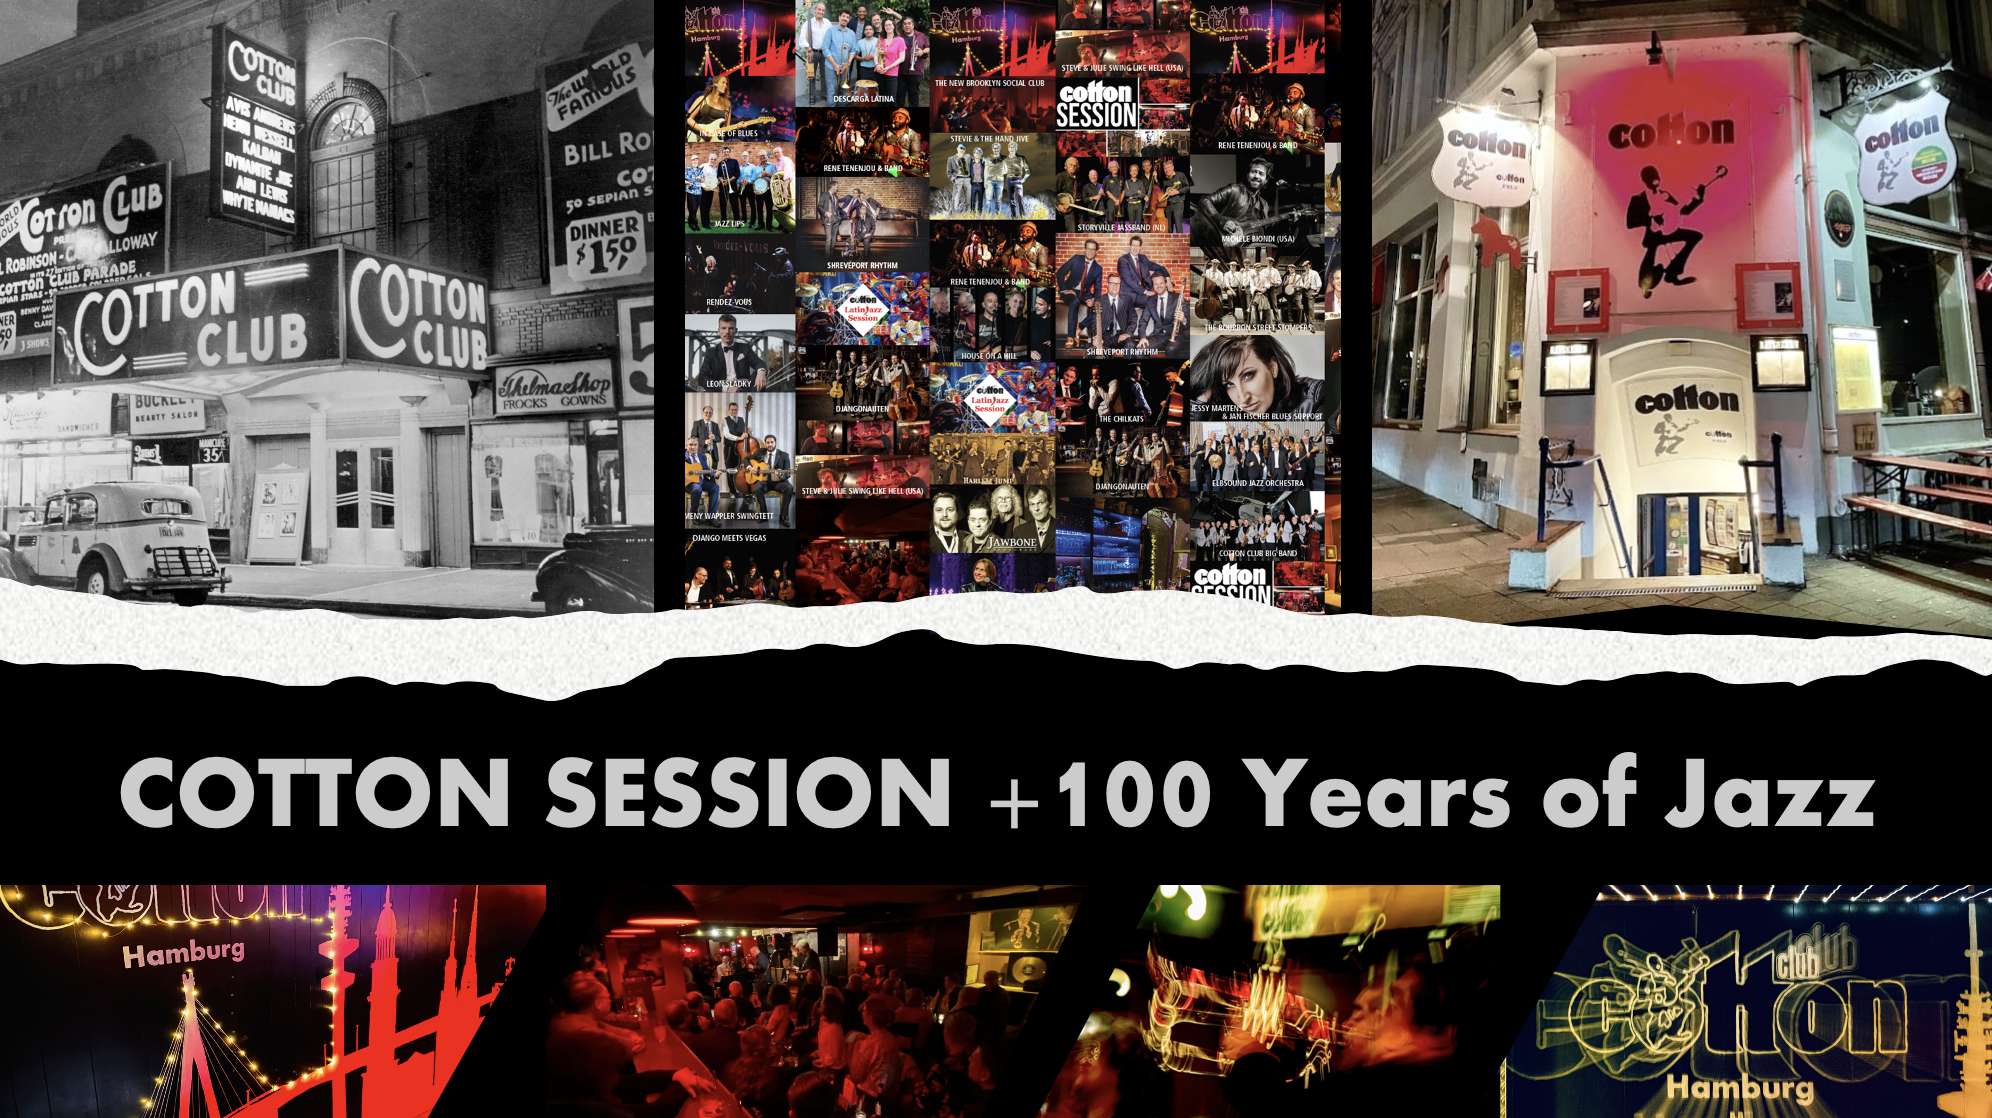 COTTON SESSION +100 YEARS OF JAZZ - led by Markus Voigt (Swing)